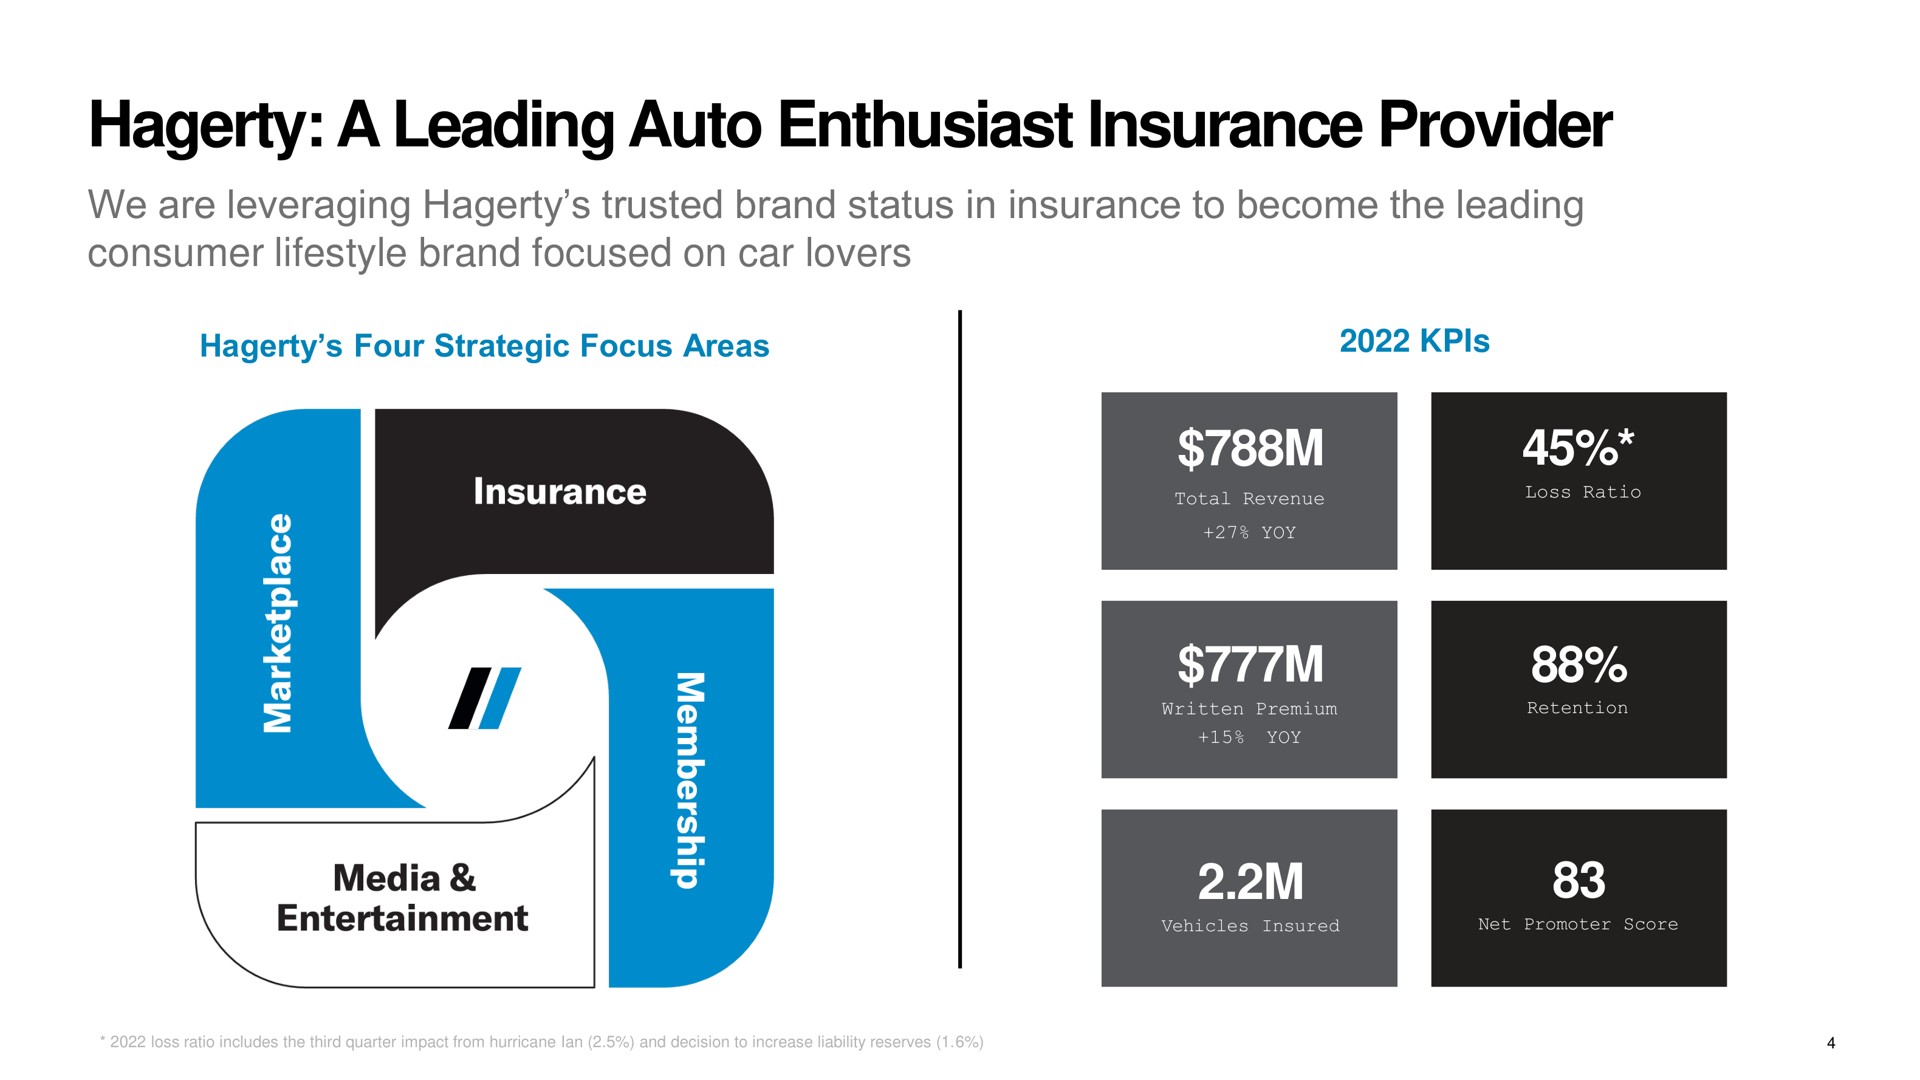 a leading auto enthusiast insurance provider | Hagerty